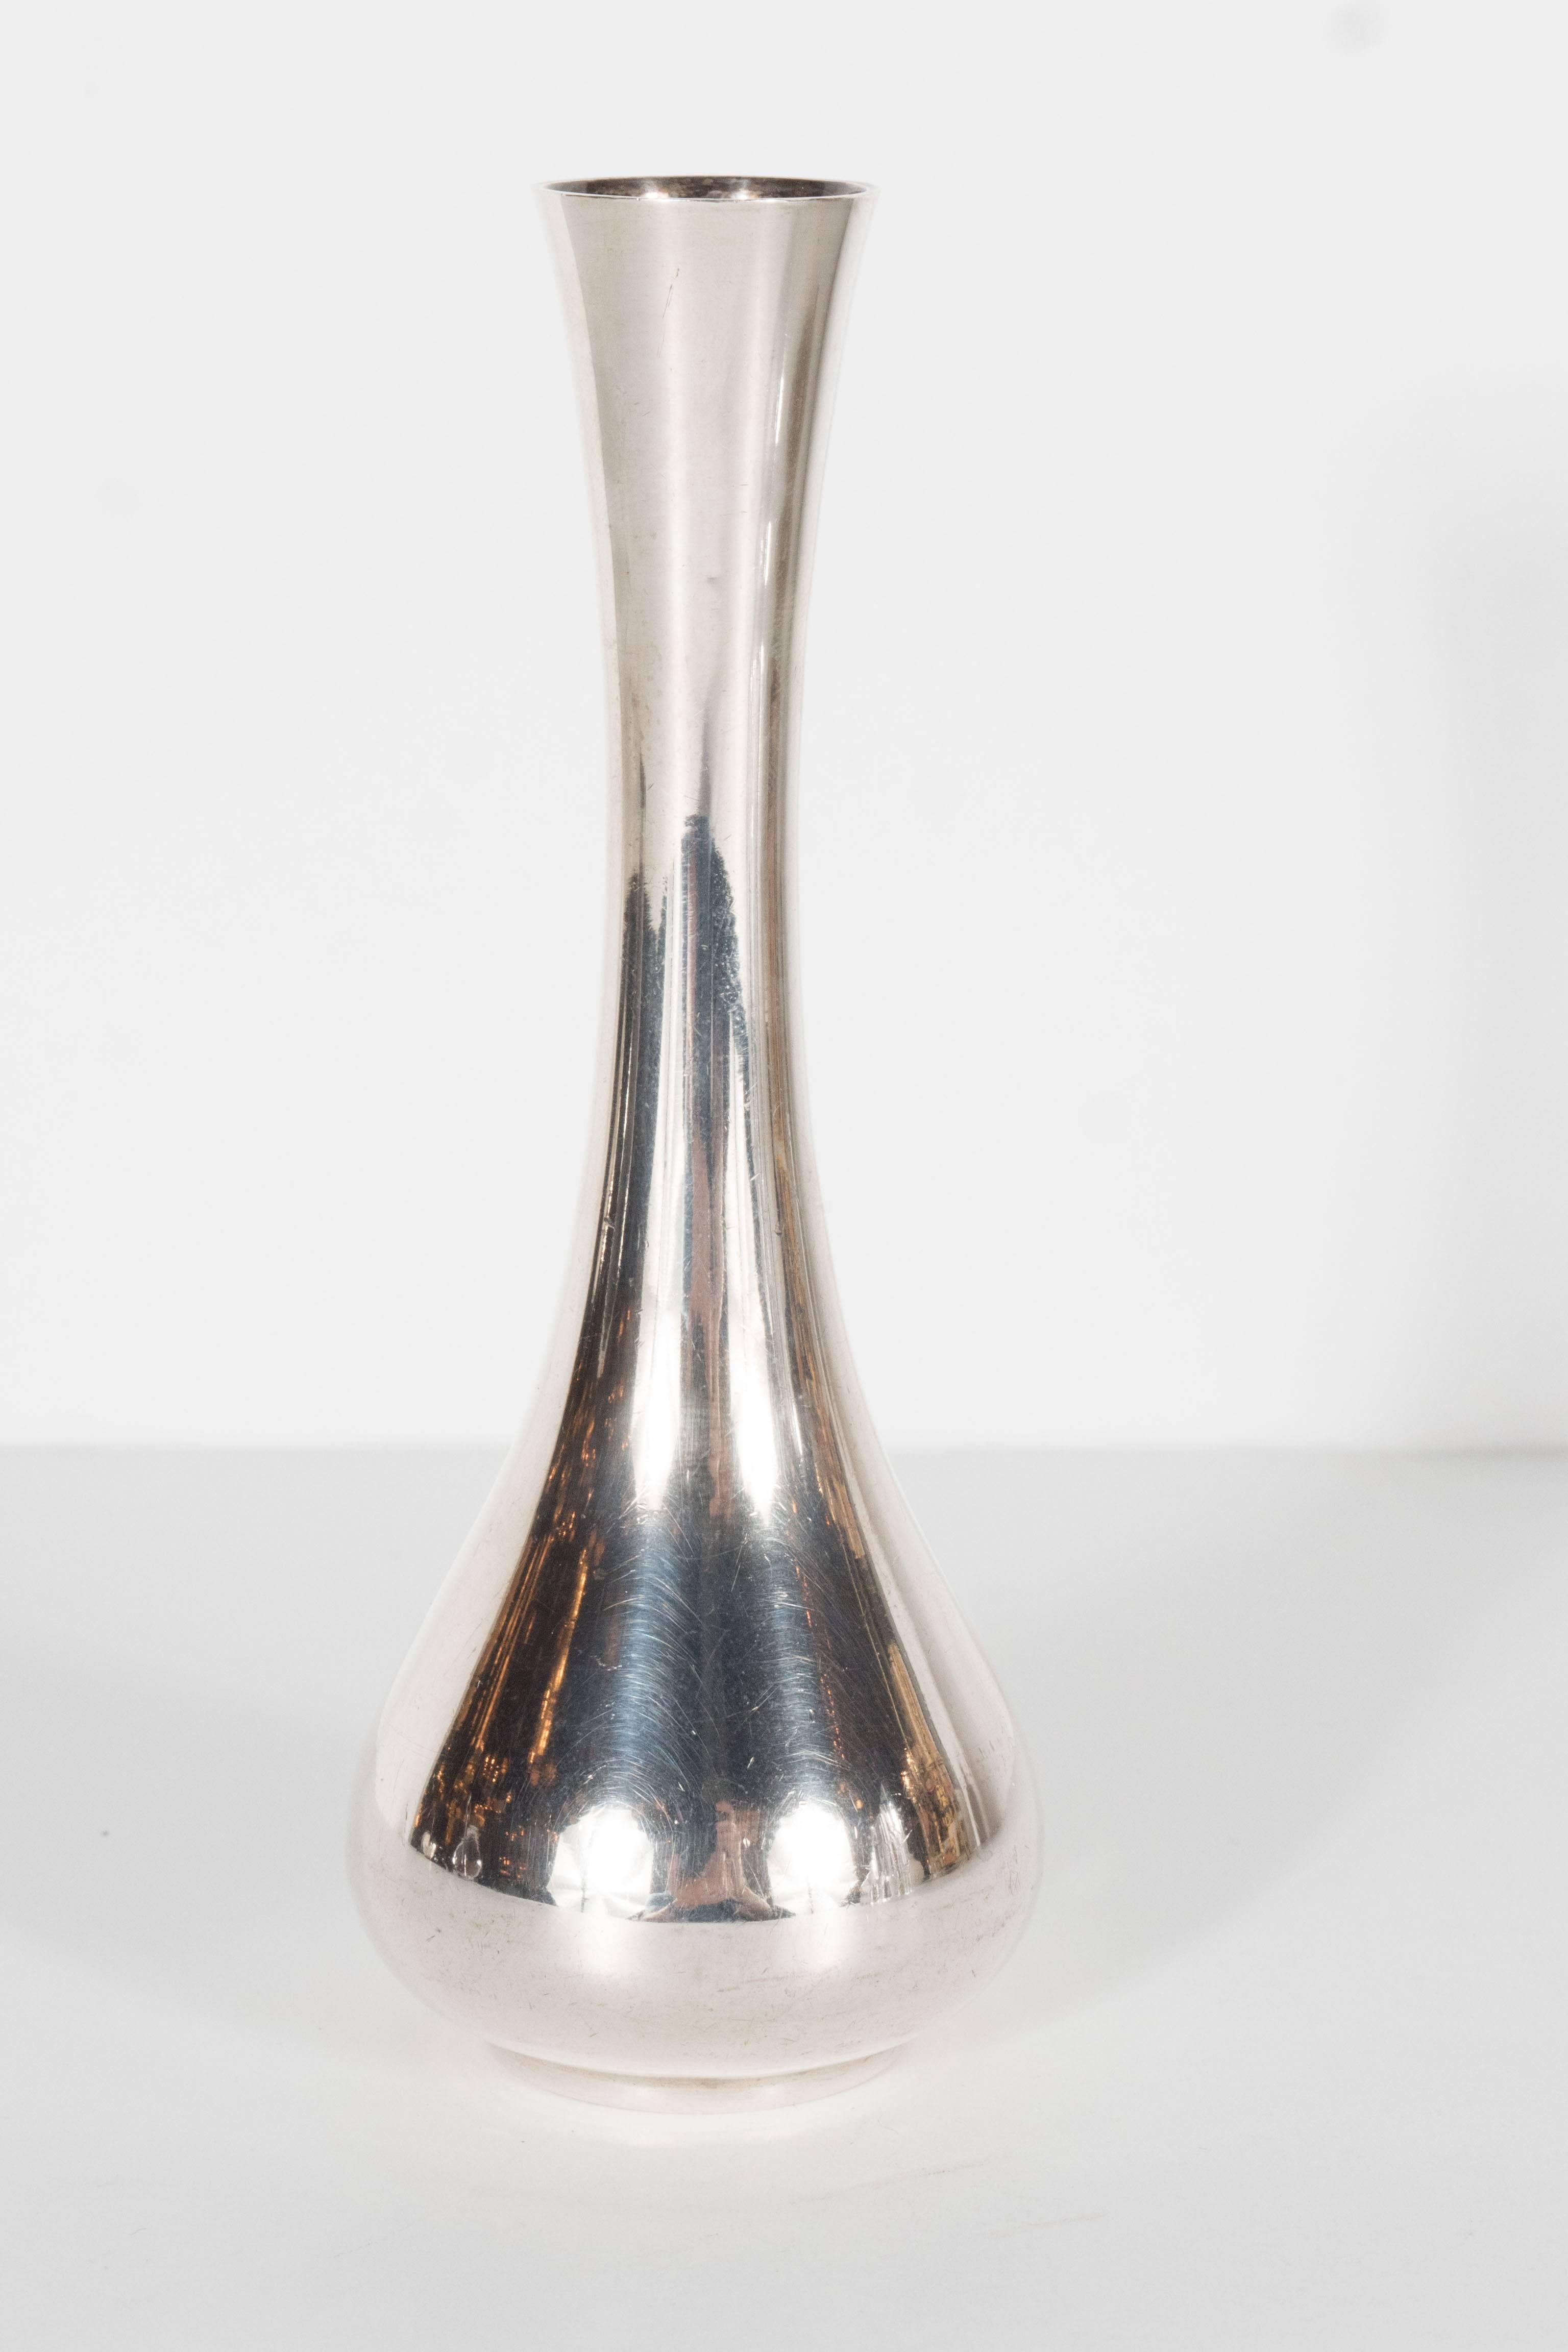 American Mid-Century Modernist Sterling Silver Bud Vase by Tiffany & Co